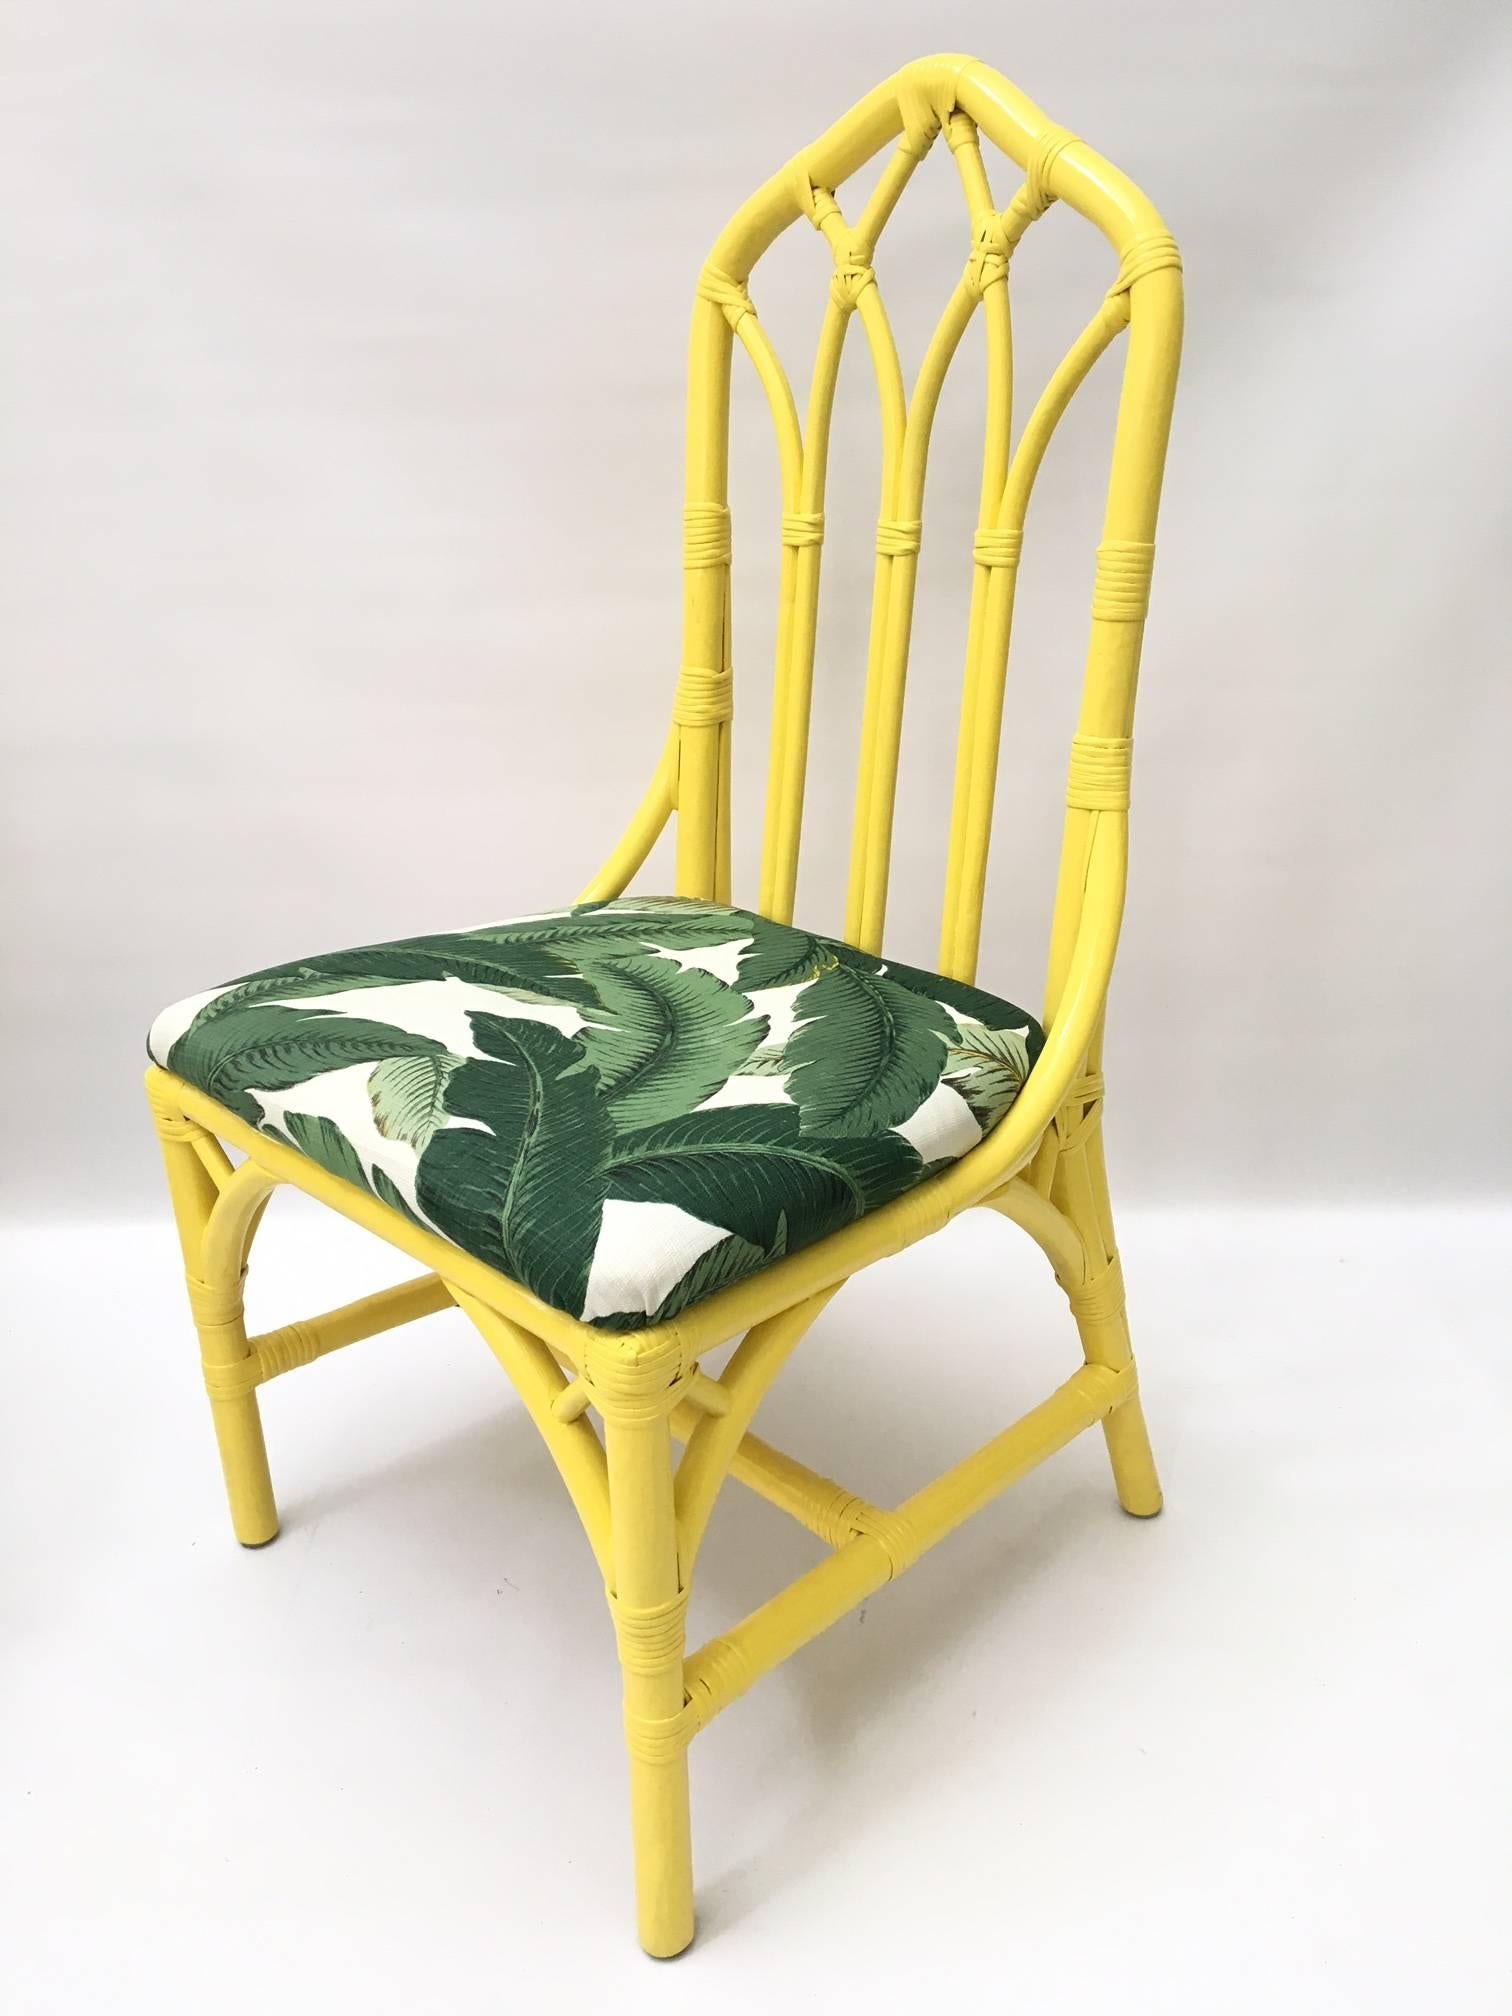 Fabulous set of six bamboo cathedral style dining chairs in bright yellow featuring palm leaf print upholstery. Excellent vintage condition.

Armchairs measure 22.5